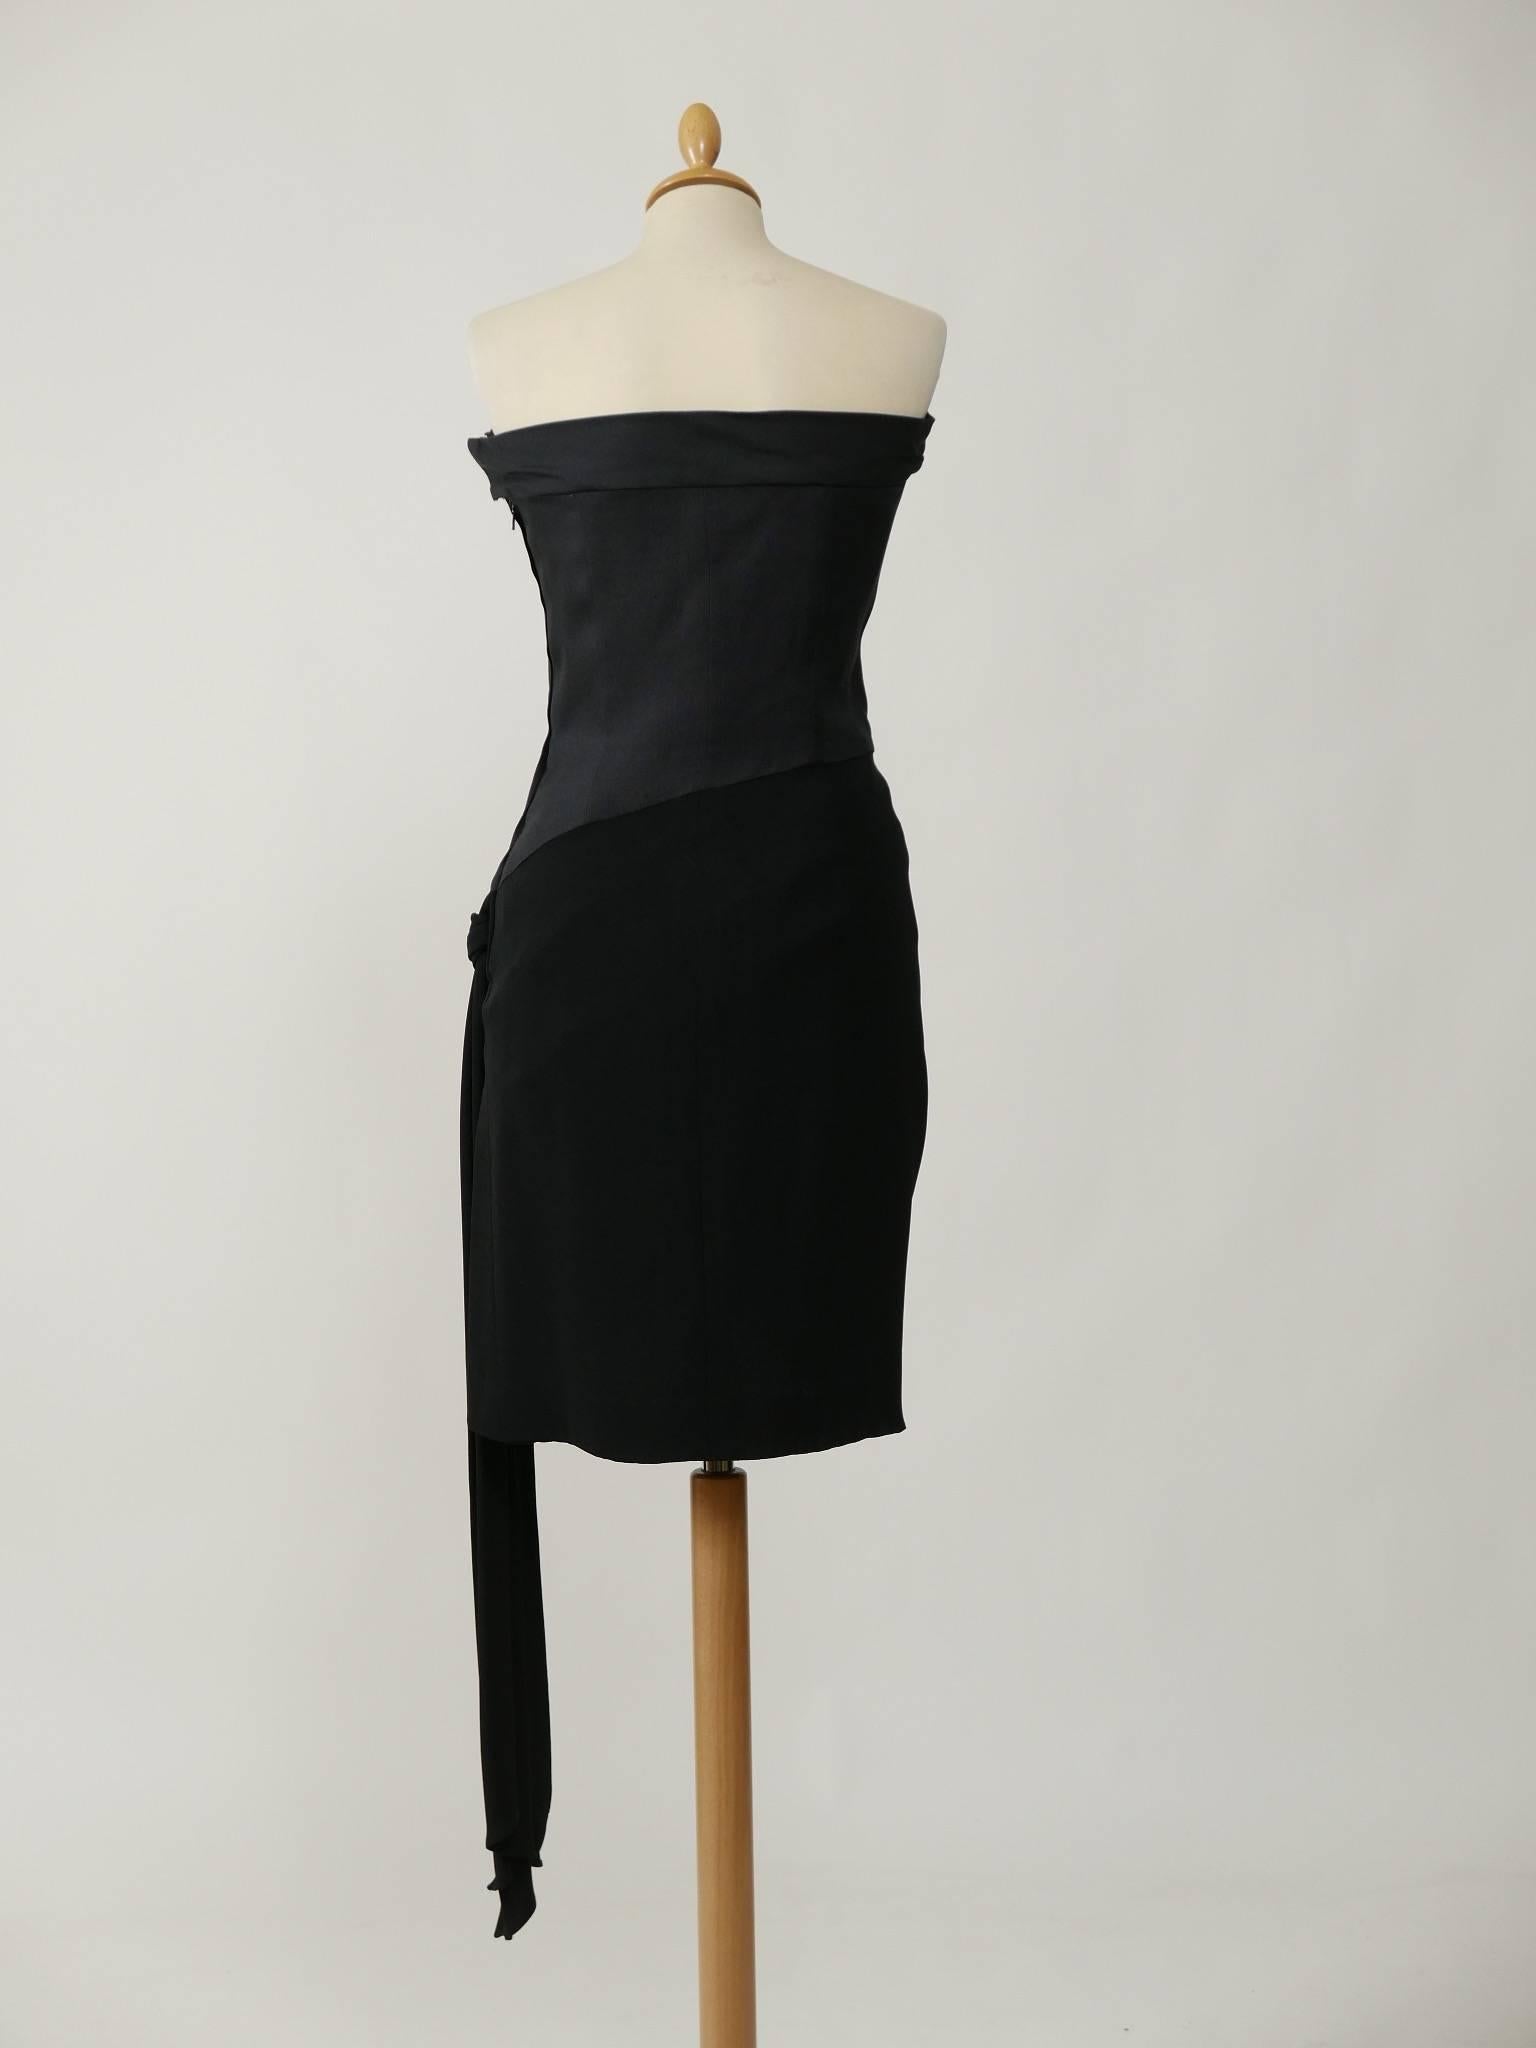 1980s SAINT LAURENT Rive Gauche Black Strapless Cocktail Dress In Excellent Condition For Sale In Milan, Italy